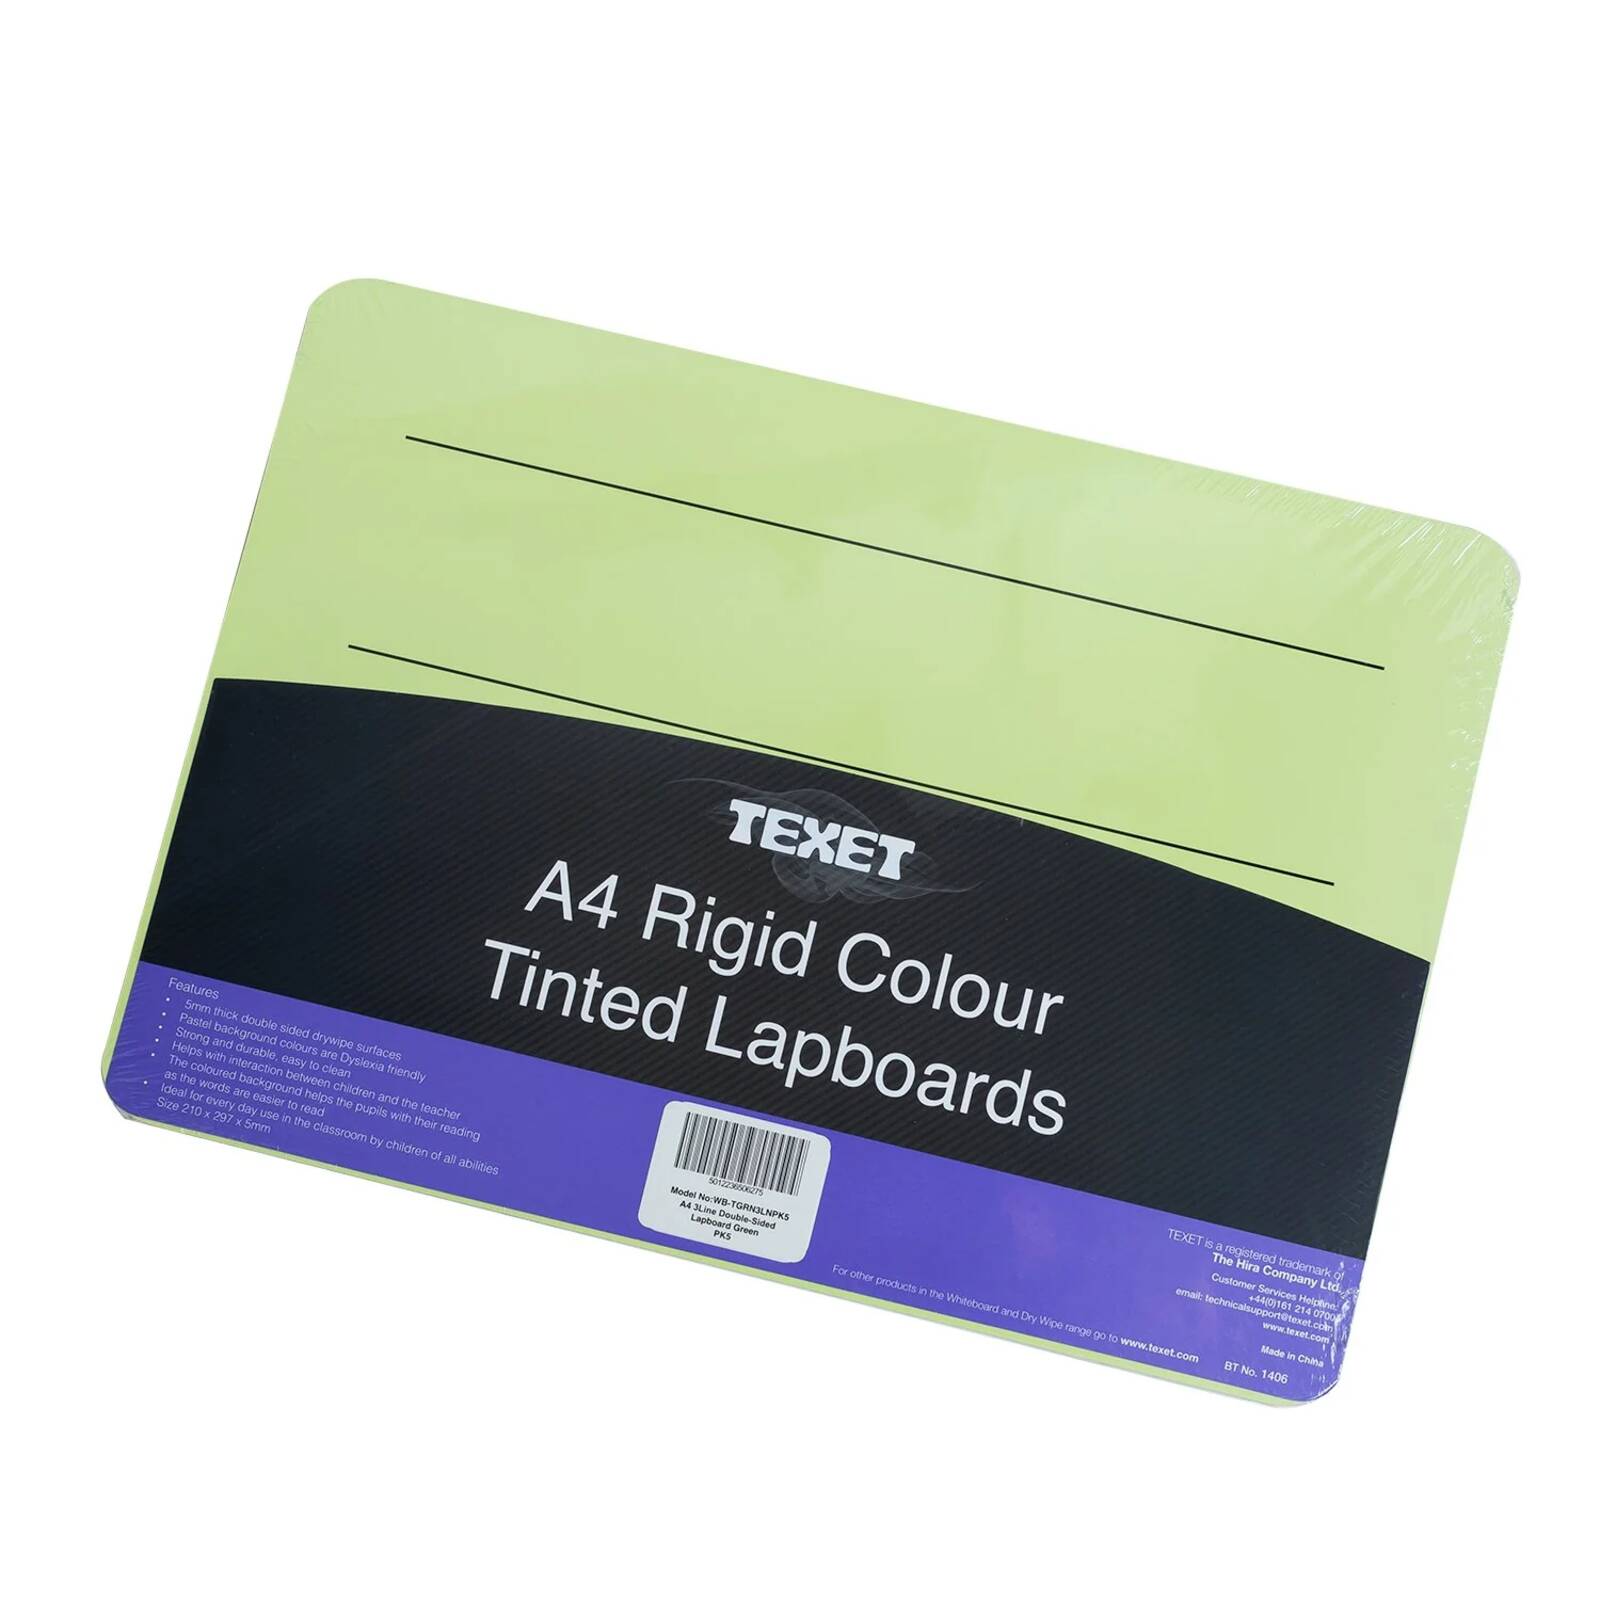 Texet A4 Rigid 3 Line Double-Sided Lapboard Green Pack of 5